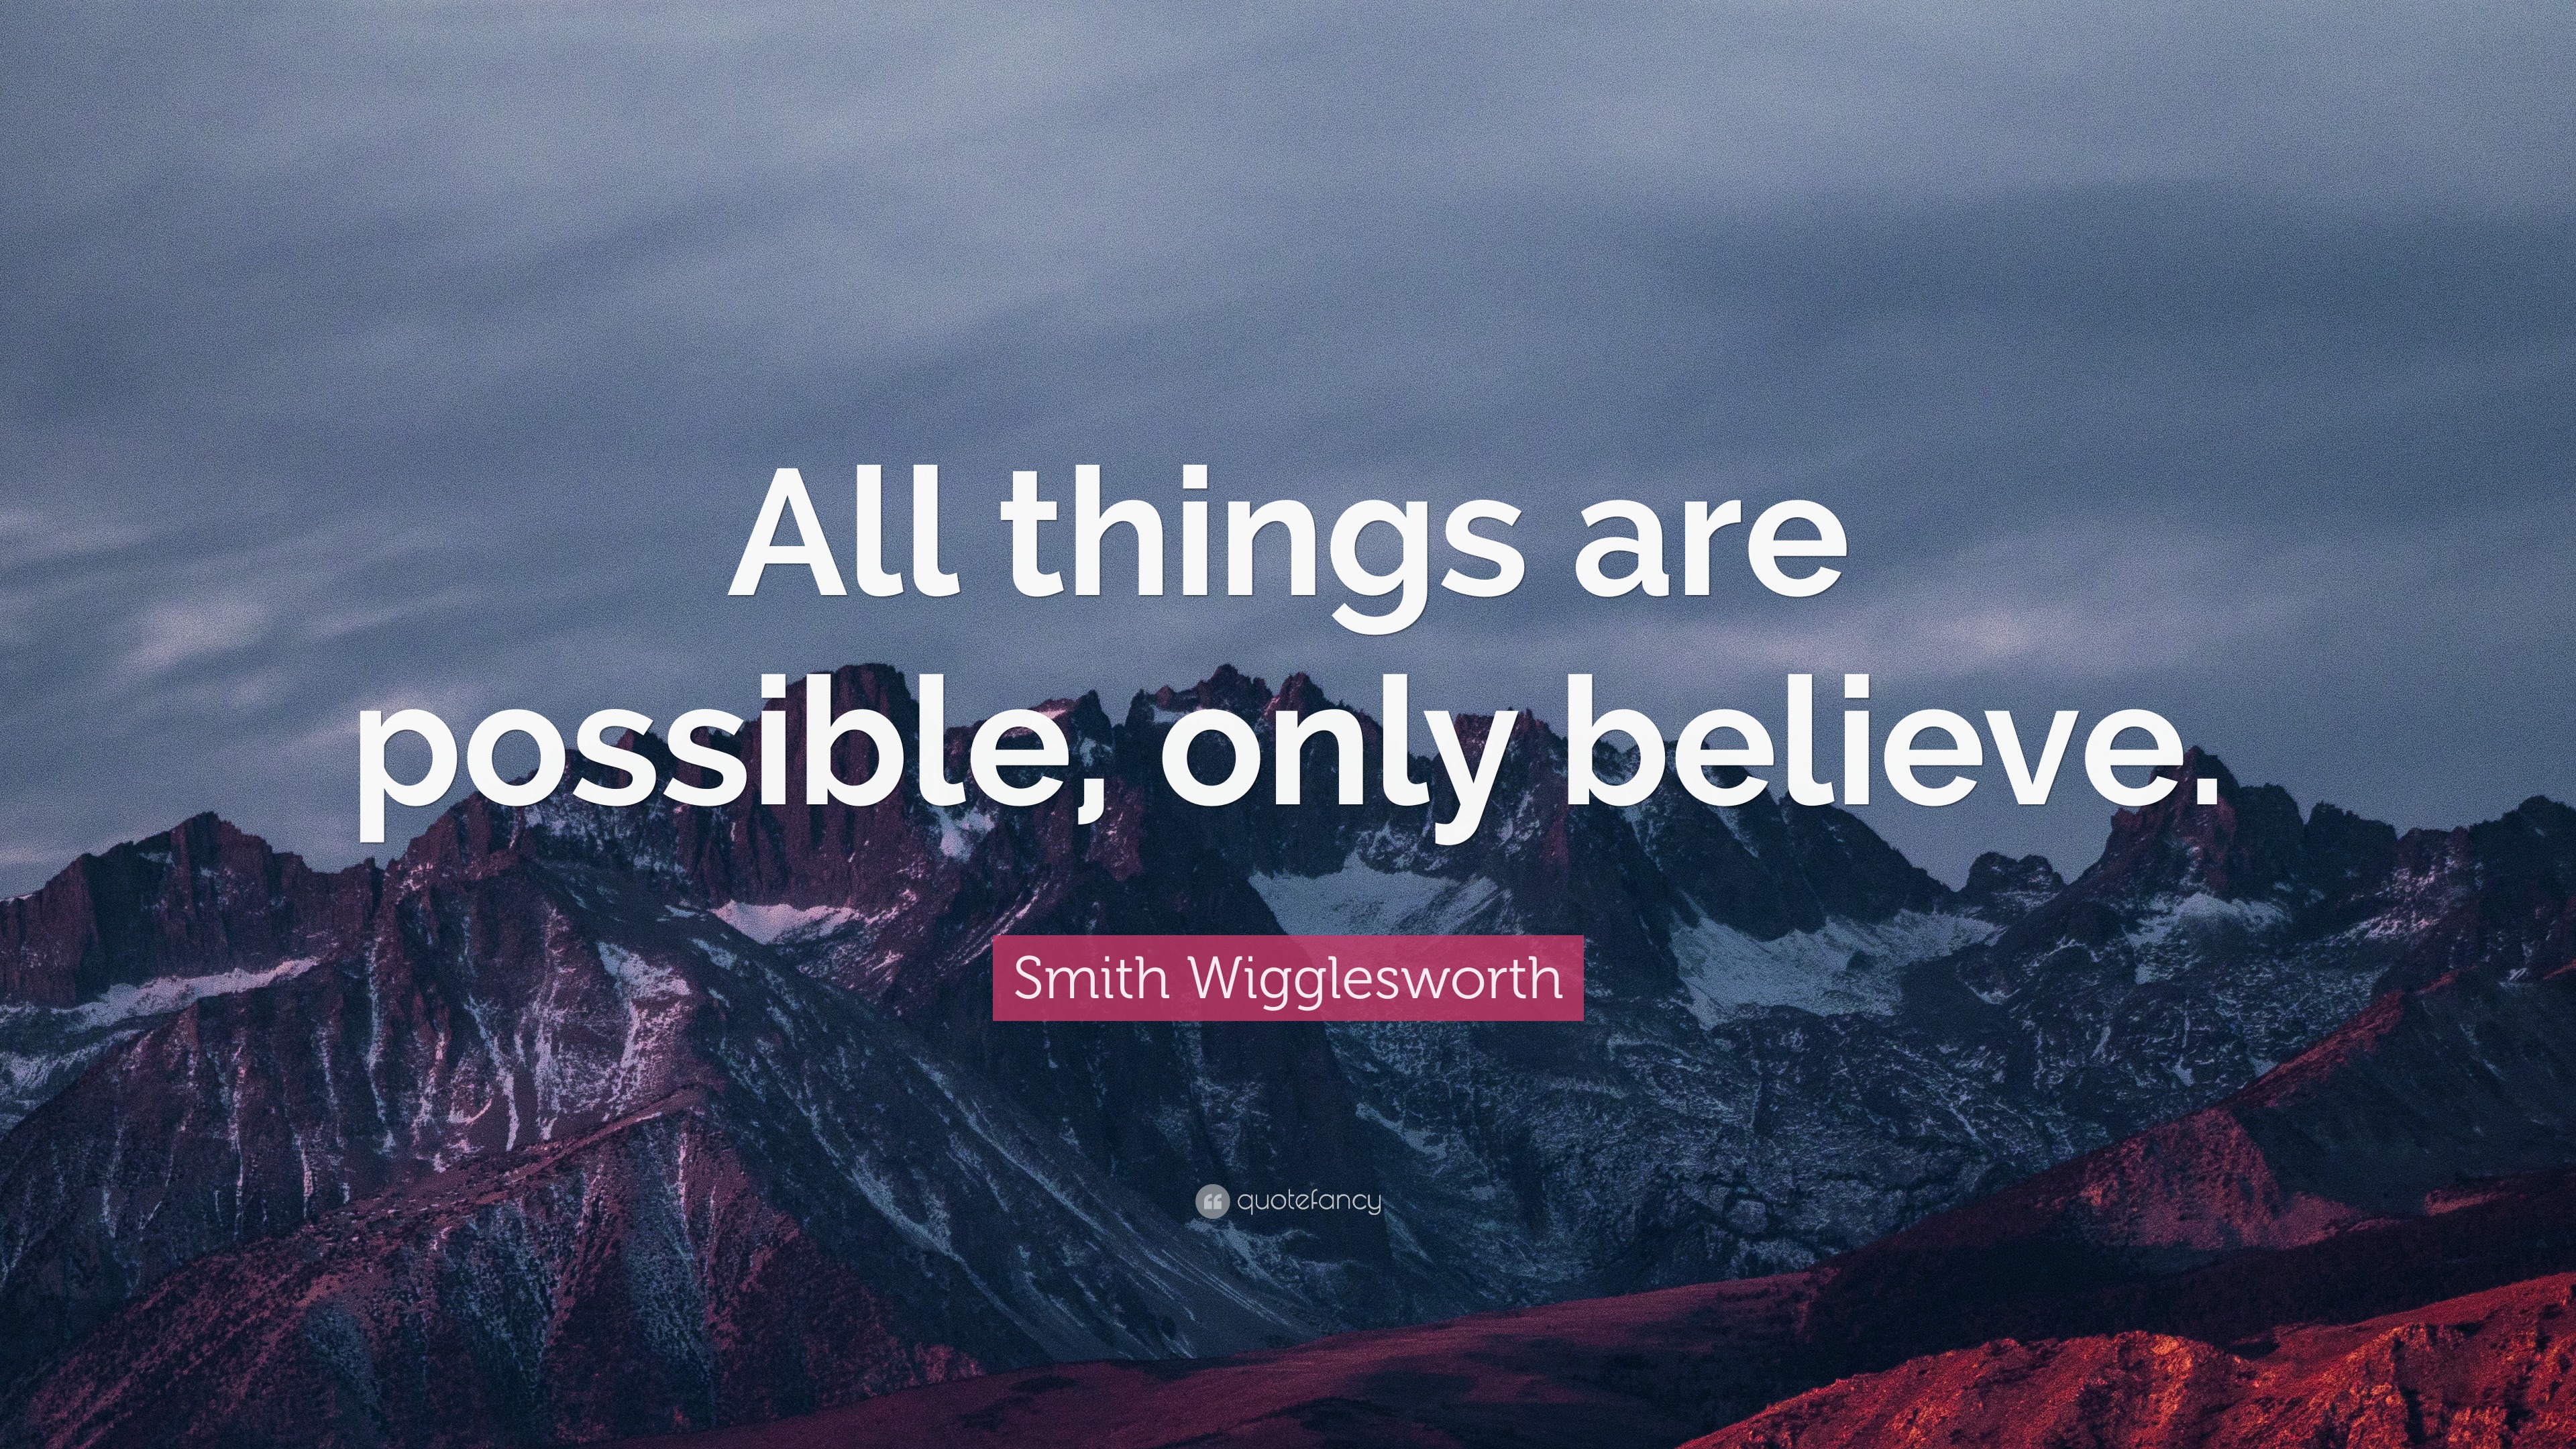 Smith Wigglesworth Quote: “All things are possible, only believe.”